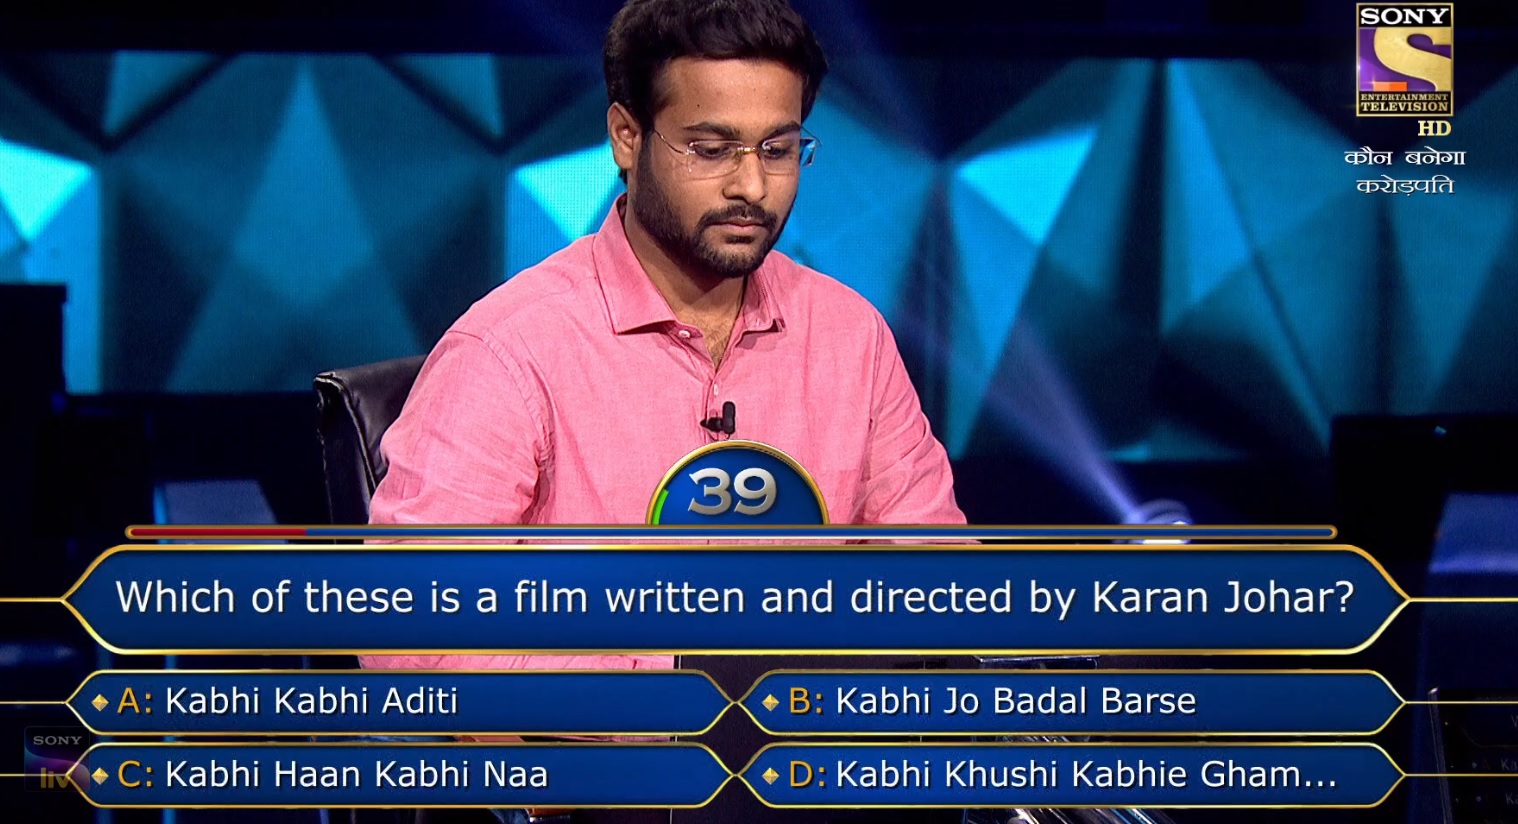 Ques : Which of these is a film written and directed by Karan Johar?